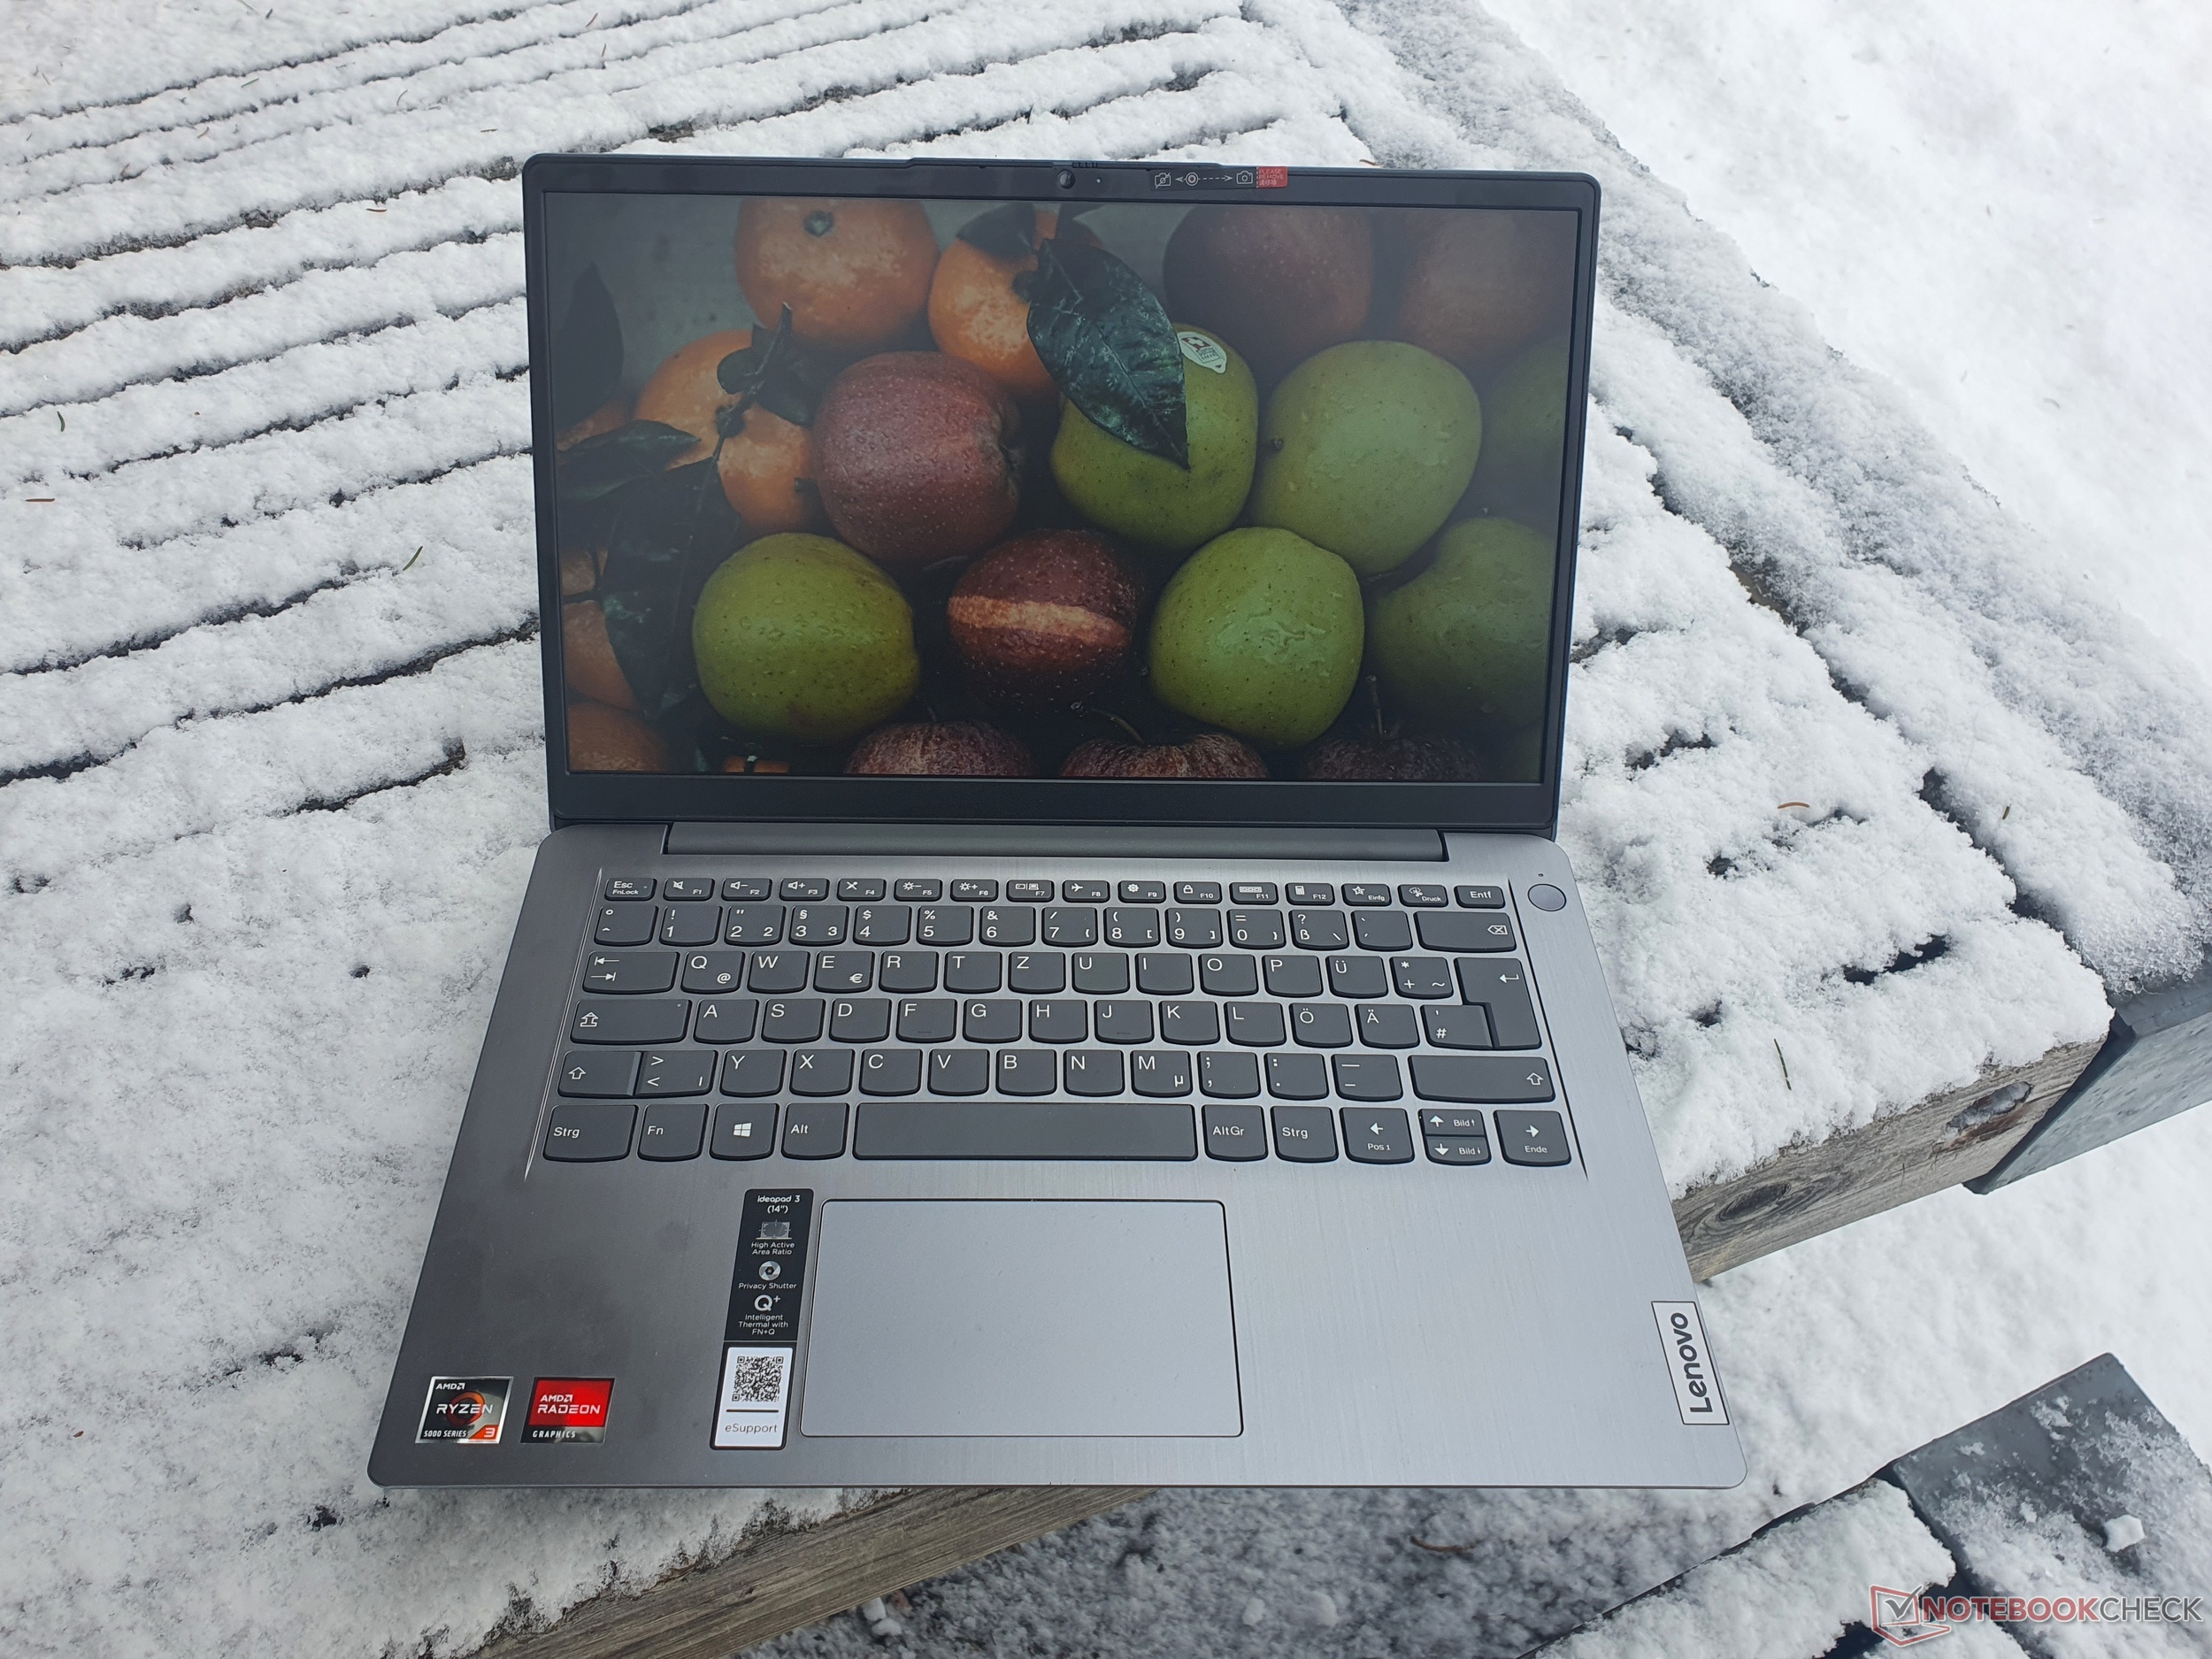 Is this a good thinkpad around 200€ that can run things such as